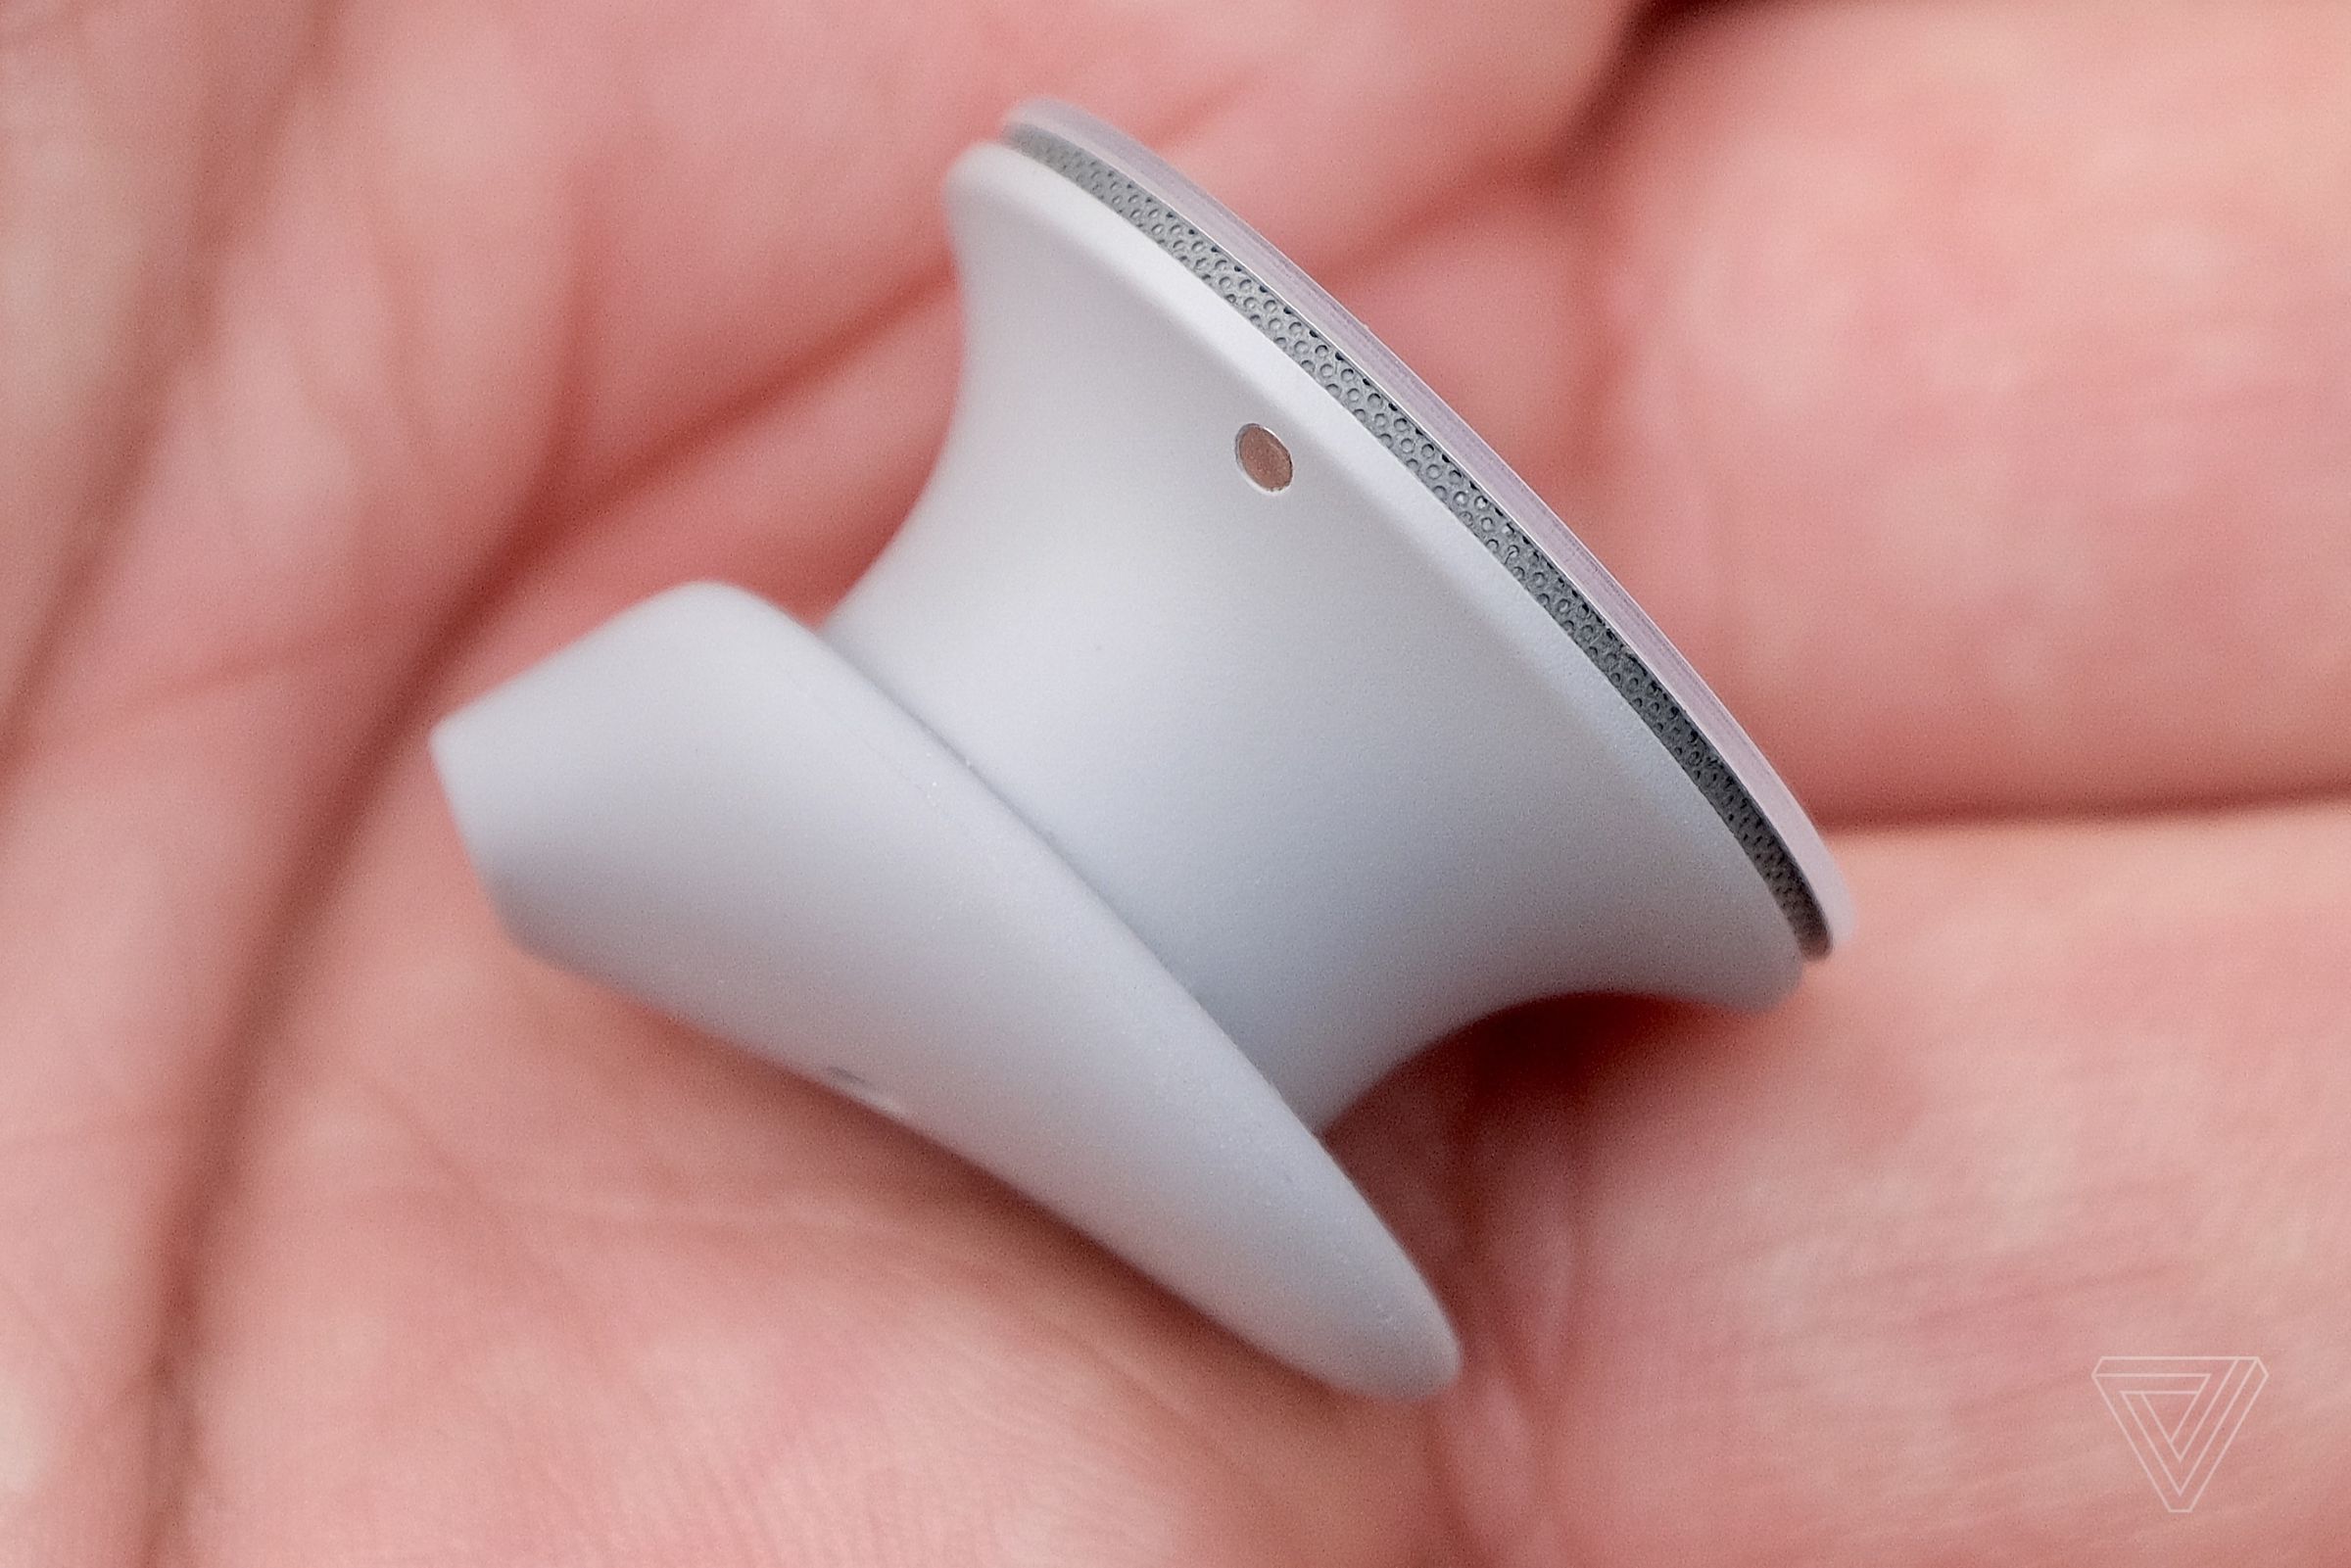 A close-up photo of the exterior Surface Earbuds design.